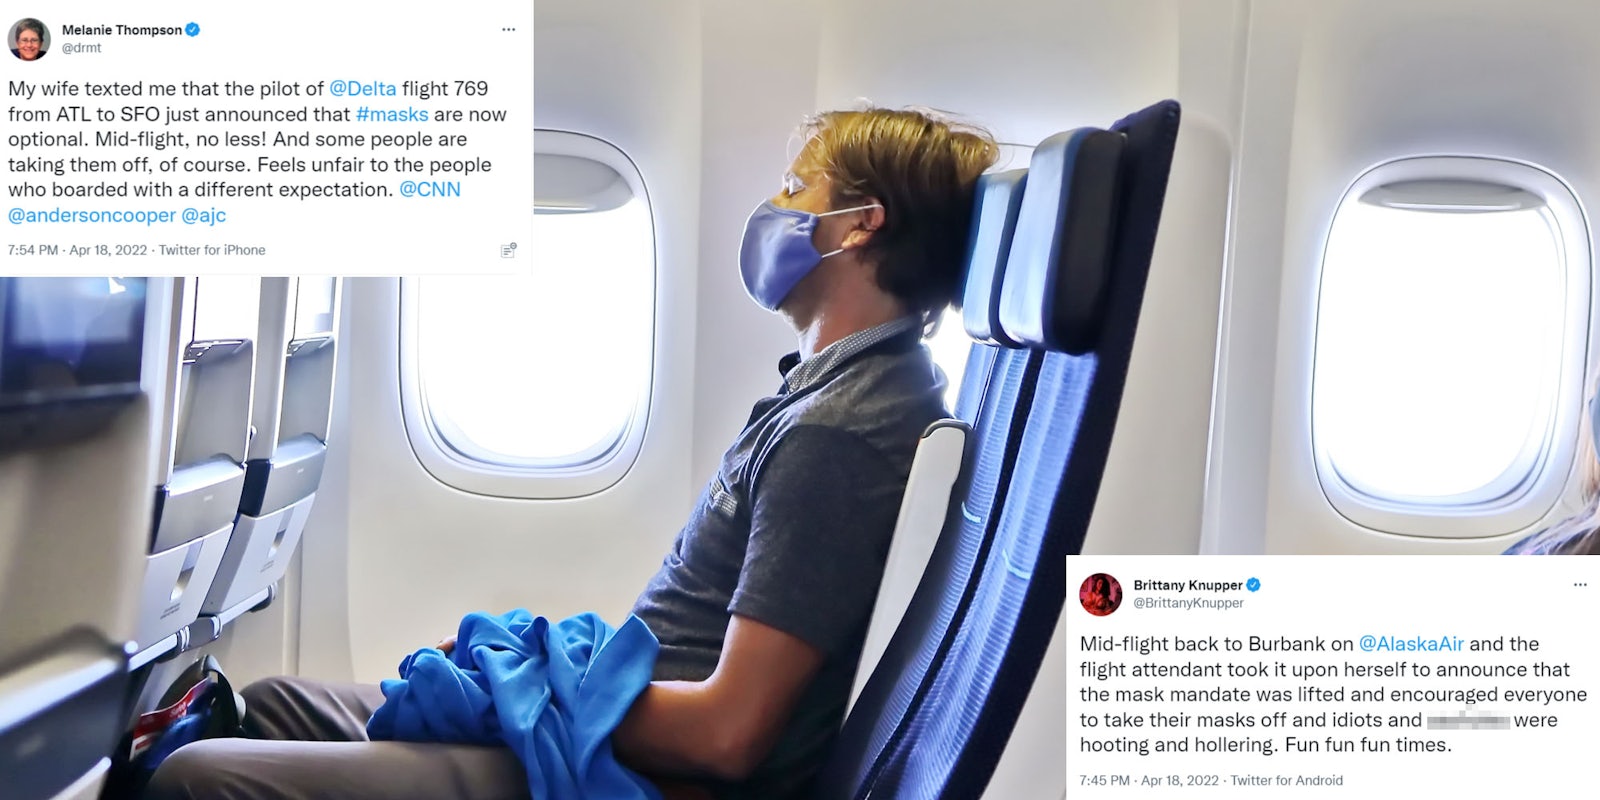 Man with mask on face in airplane seat with two tweets in opposite corners left tweet reads 'My wife texted me that the pilot of @Delta flight 769 from ATL to SFO just announced that #masks are now optional. Mid-flight, no less! And some people are taking them off, of course. Feels unfair to the people who boarded with a different expectation.' right tweet reads ' Mid-flight to Burbank on @AlaskaAir and the flight attendant took it upon herself to announce that the mask mandate was lifted and encouraged everyone to take their masks off and blank were hooting and hollering. Fun fun fun times.'